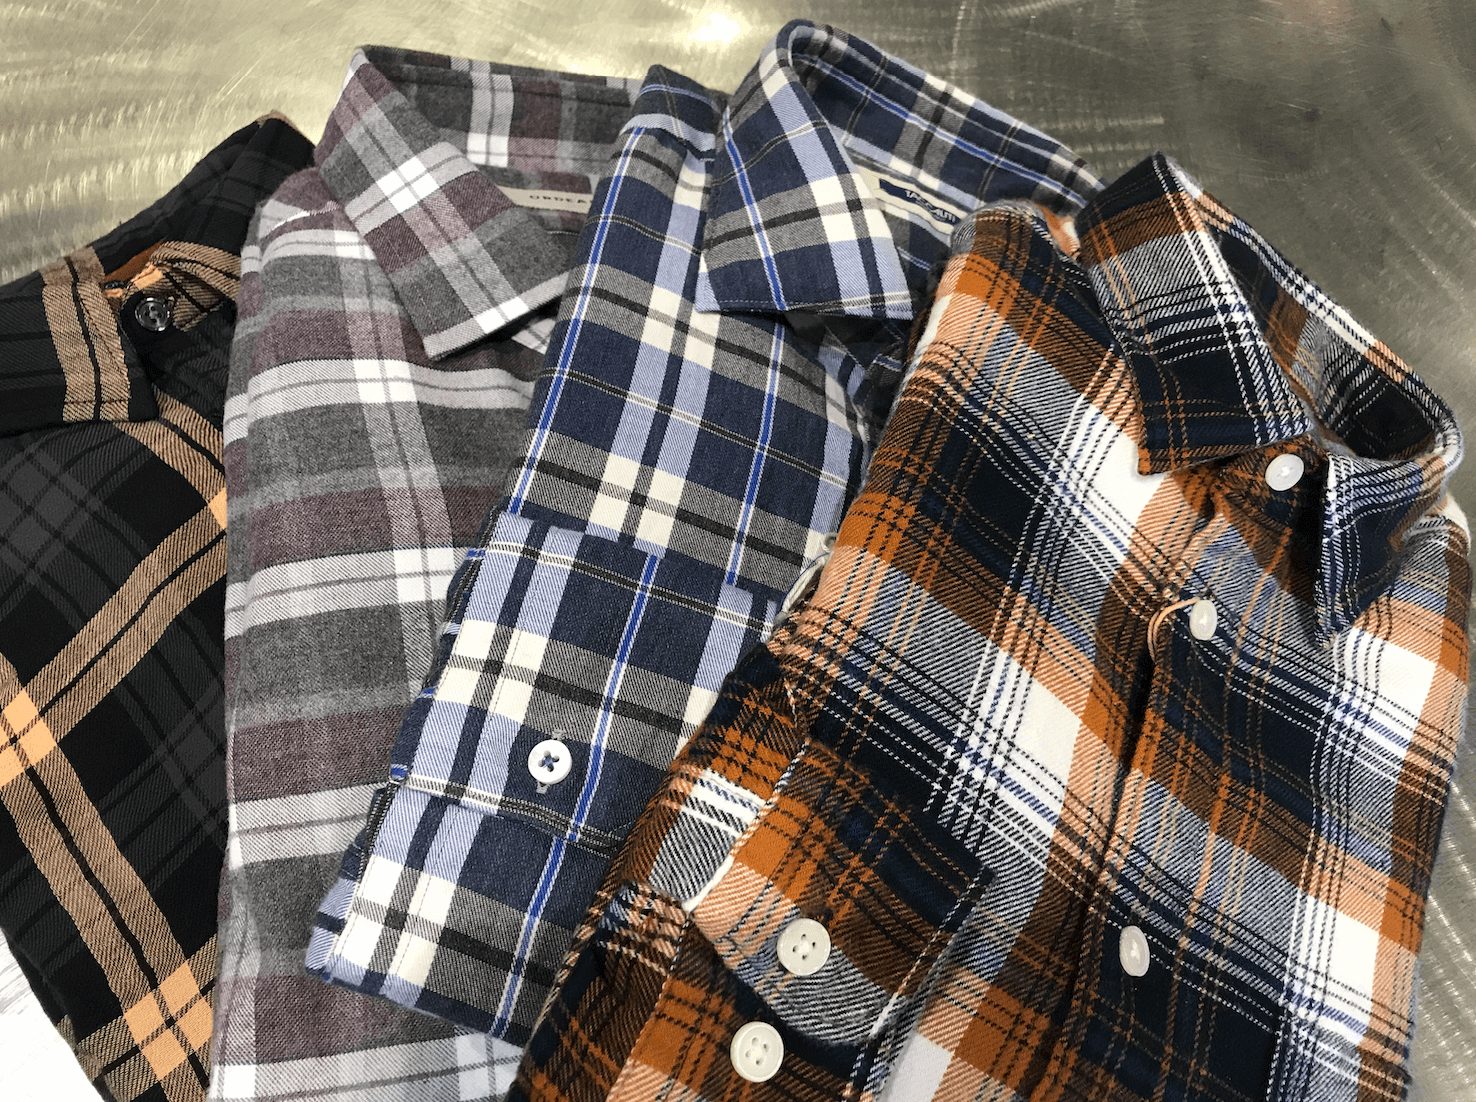 Fall is here and so are flannels. - J3Clothing